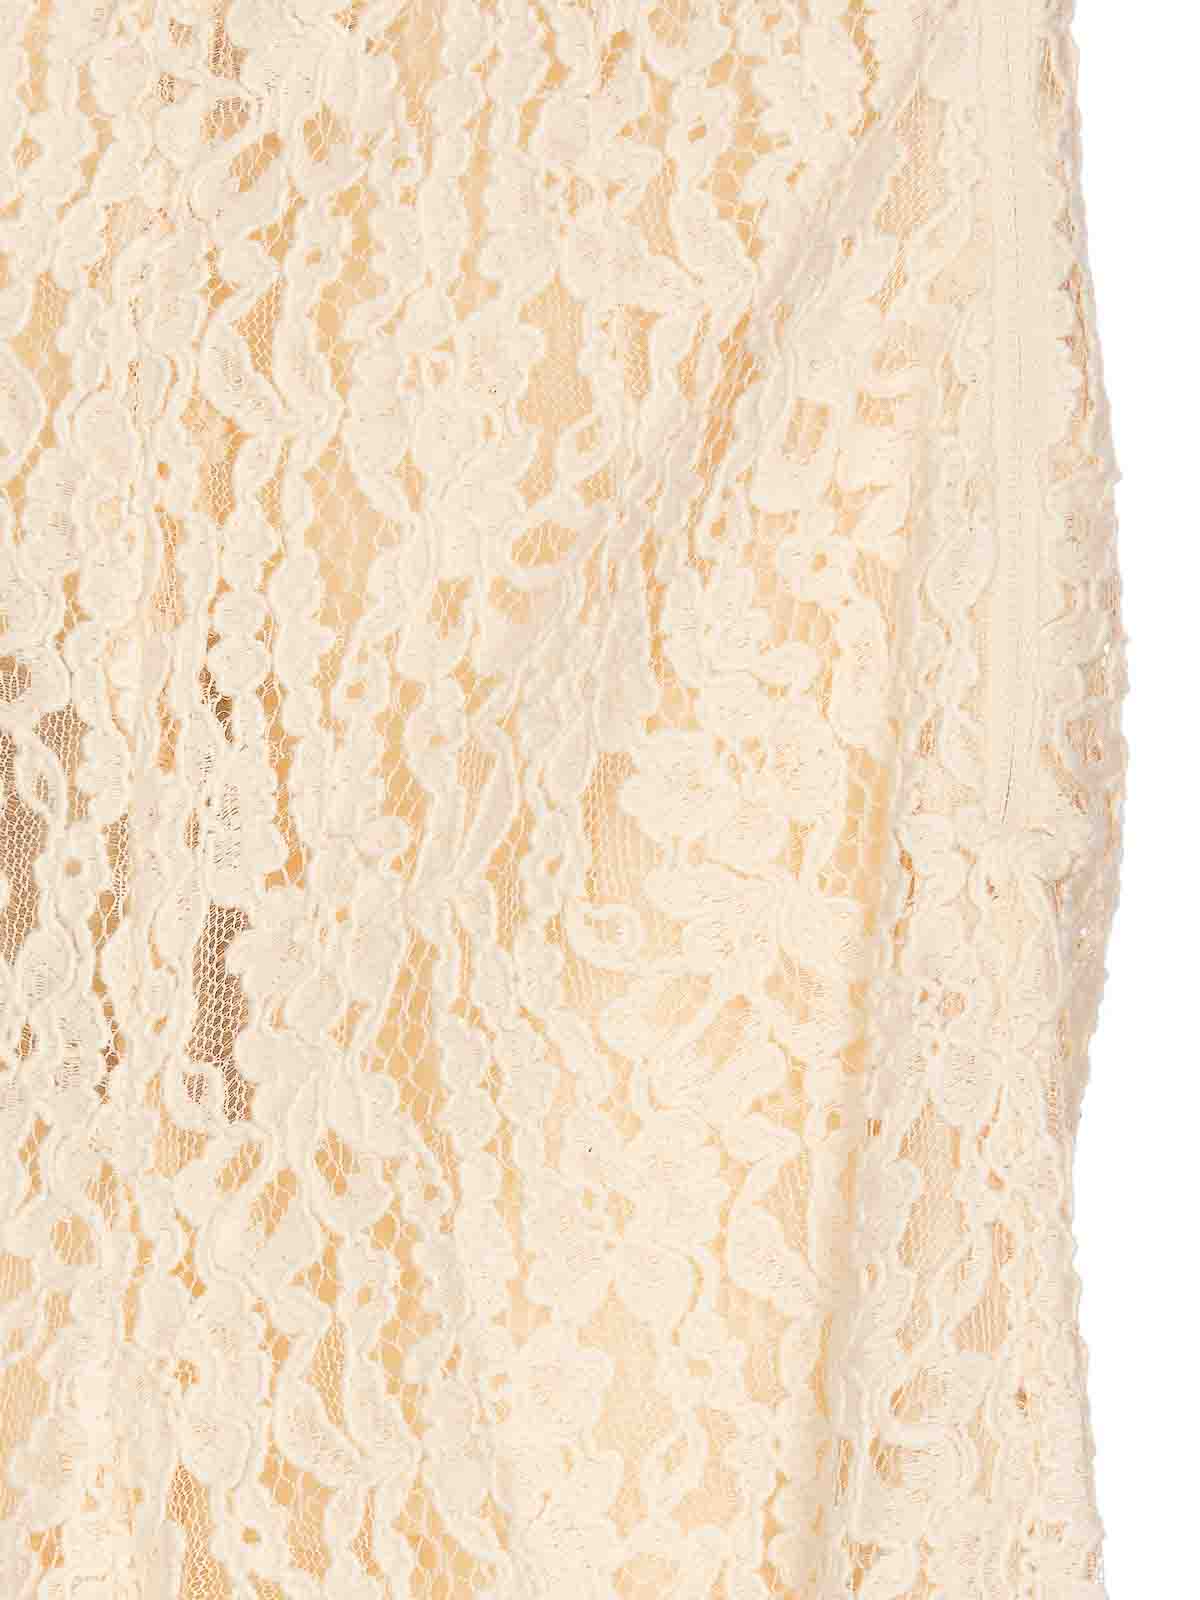 Shop Twinset Ivory Lace Pants Lateral Zip Laces In Beige